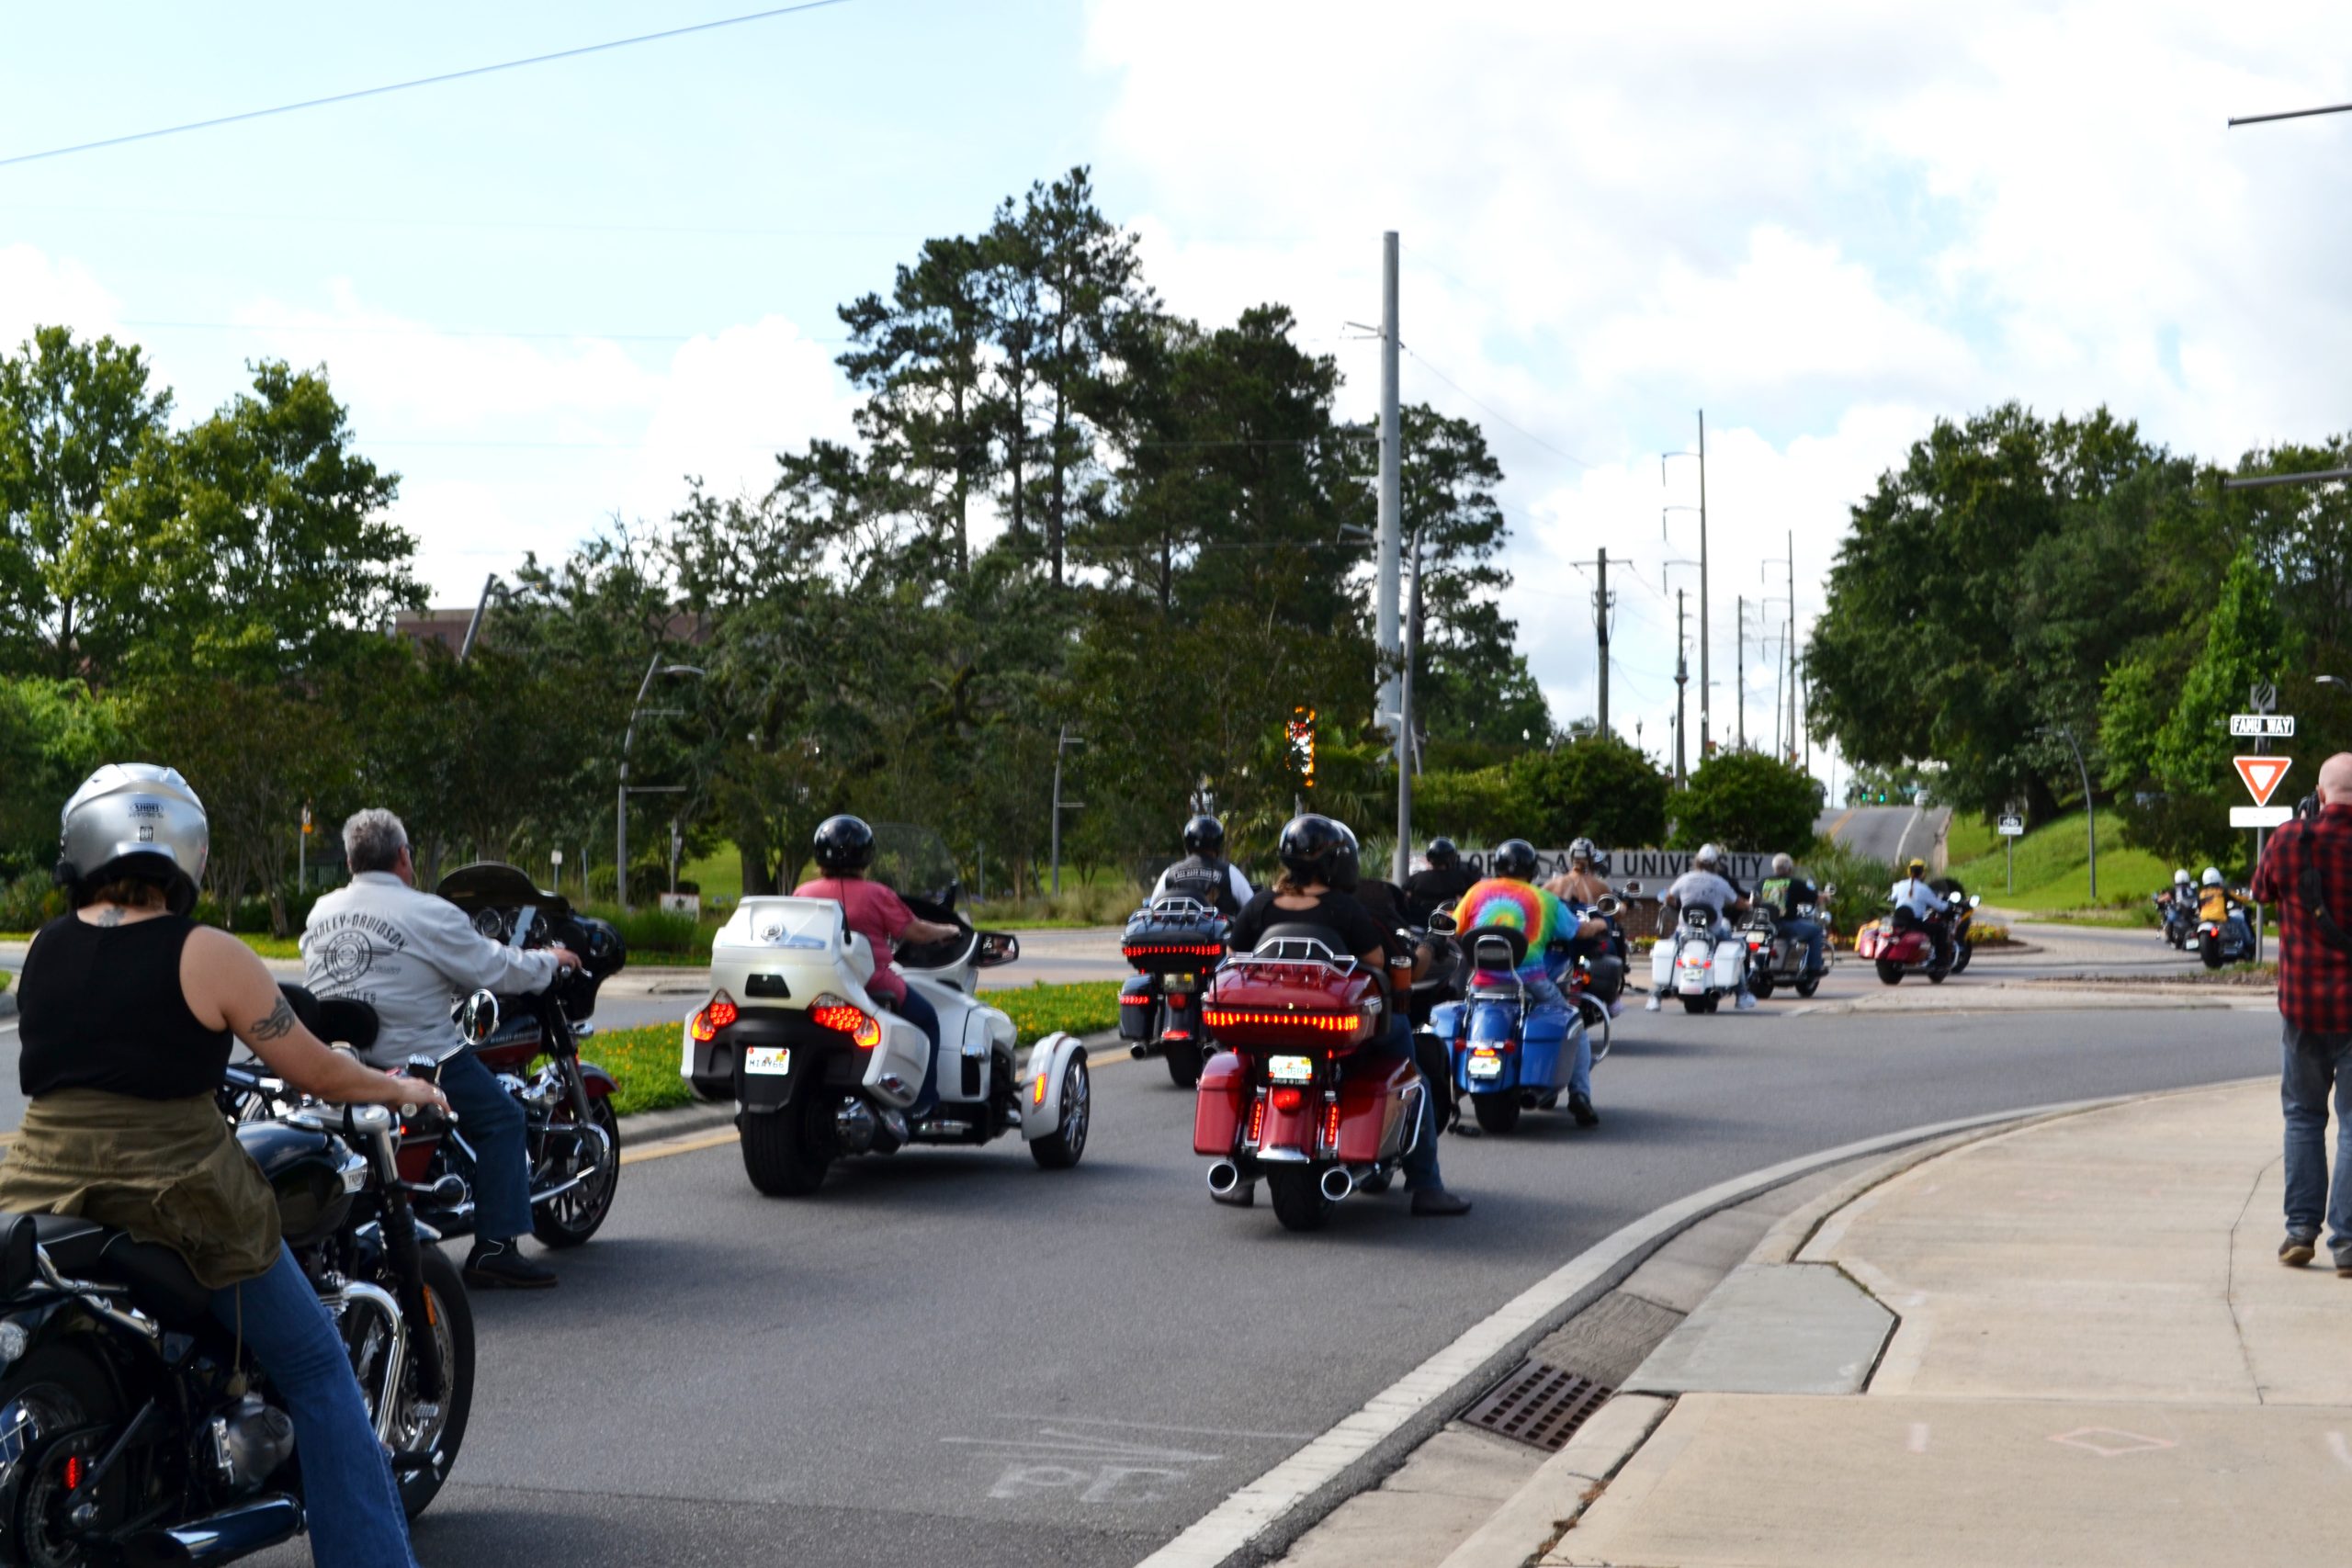 Join your tribe on any of the guided rides through the beautiful Tallahassee tree-lined streets.